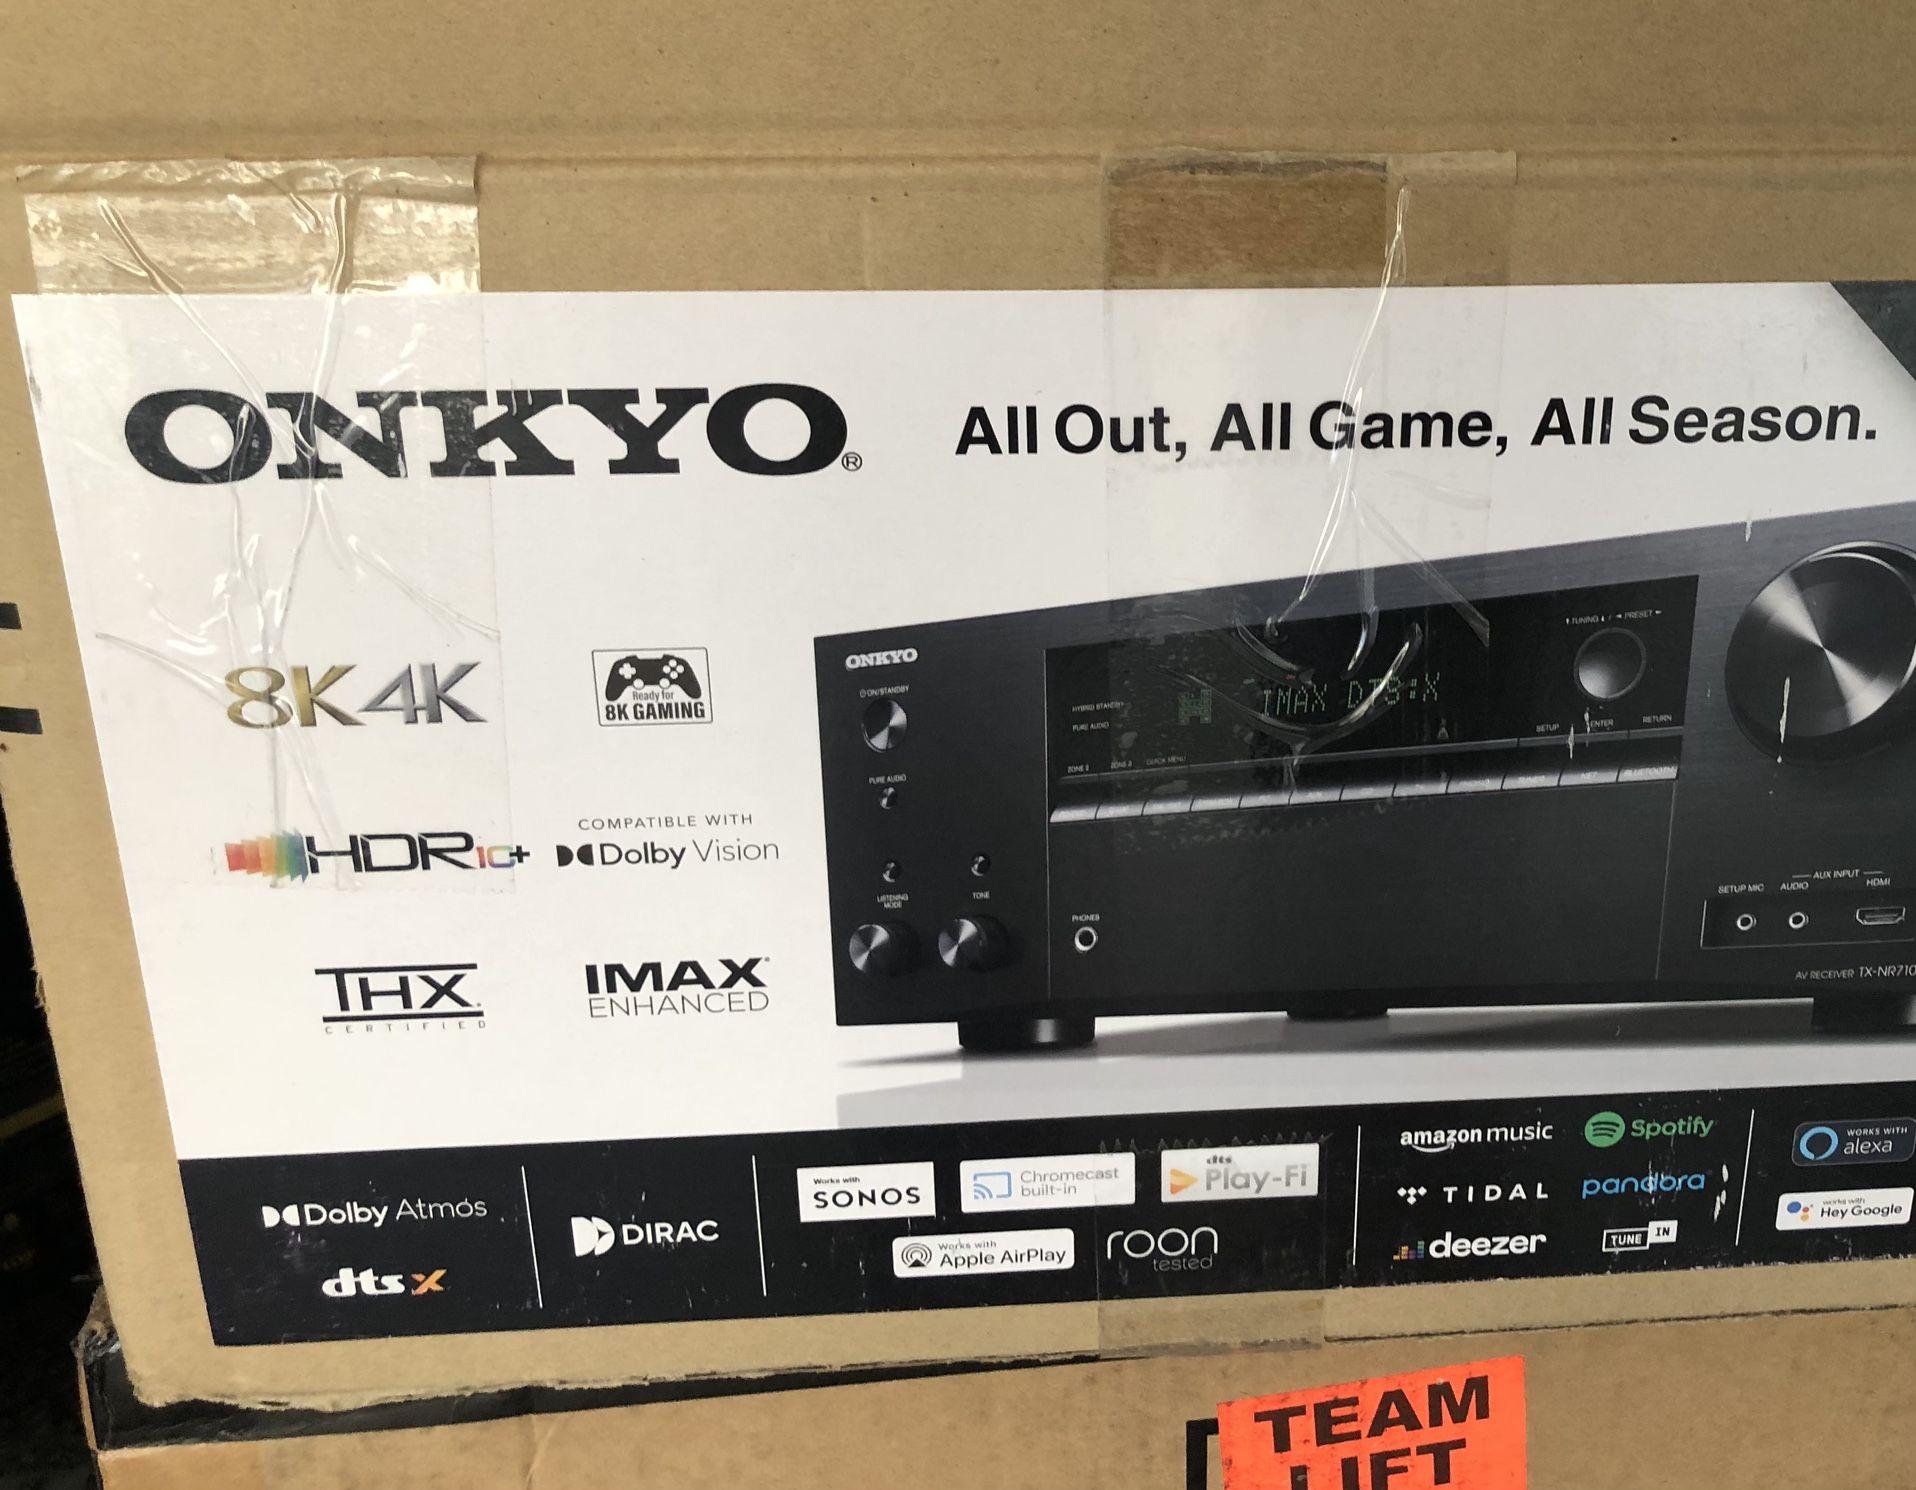 Receiver Onkyo 9.2 Channel Dolby